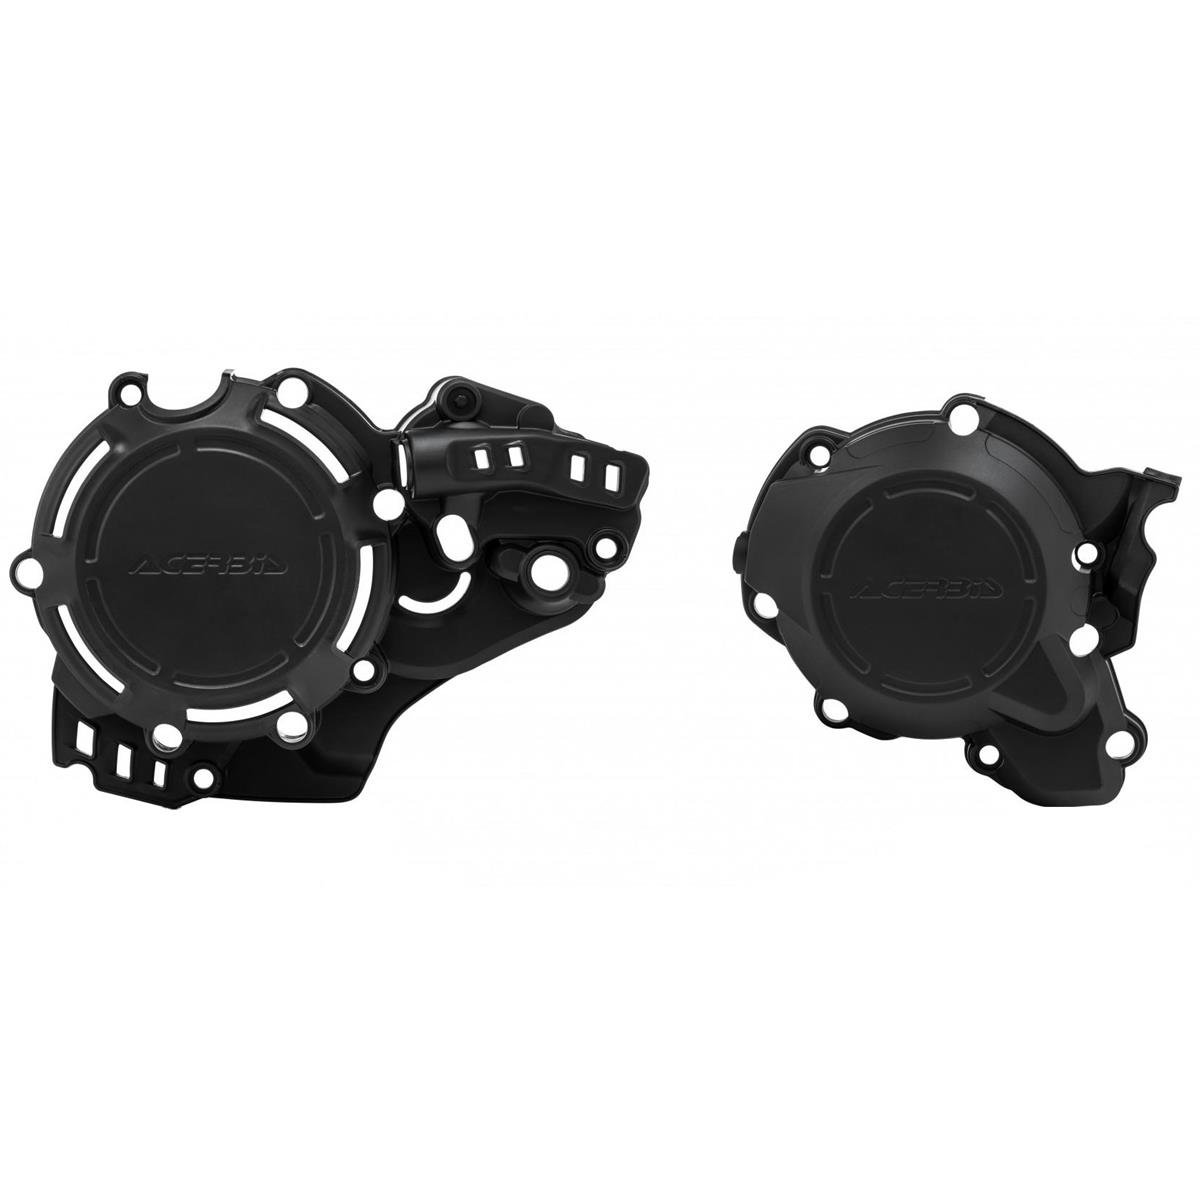 Acerbis Clutch/Ignition Cover Protection X-Power Gas Gas EC 250/300 21-, Black